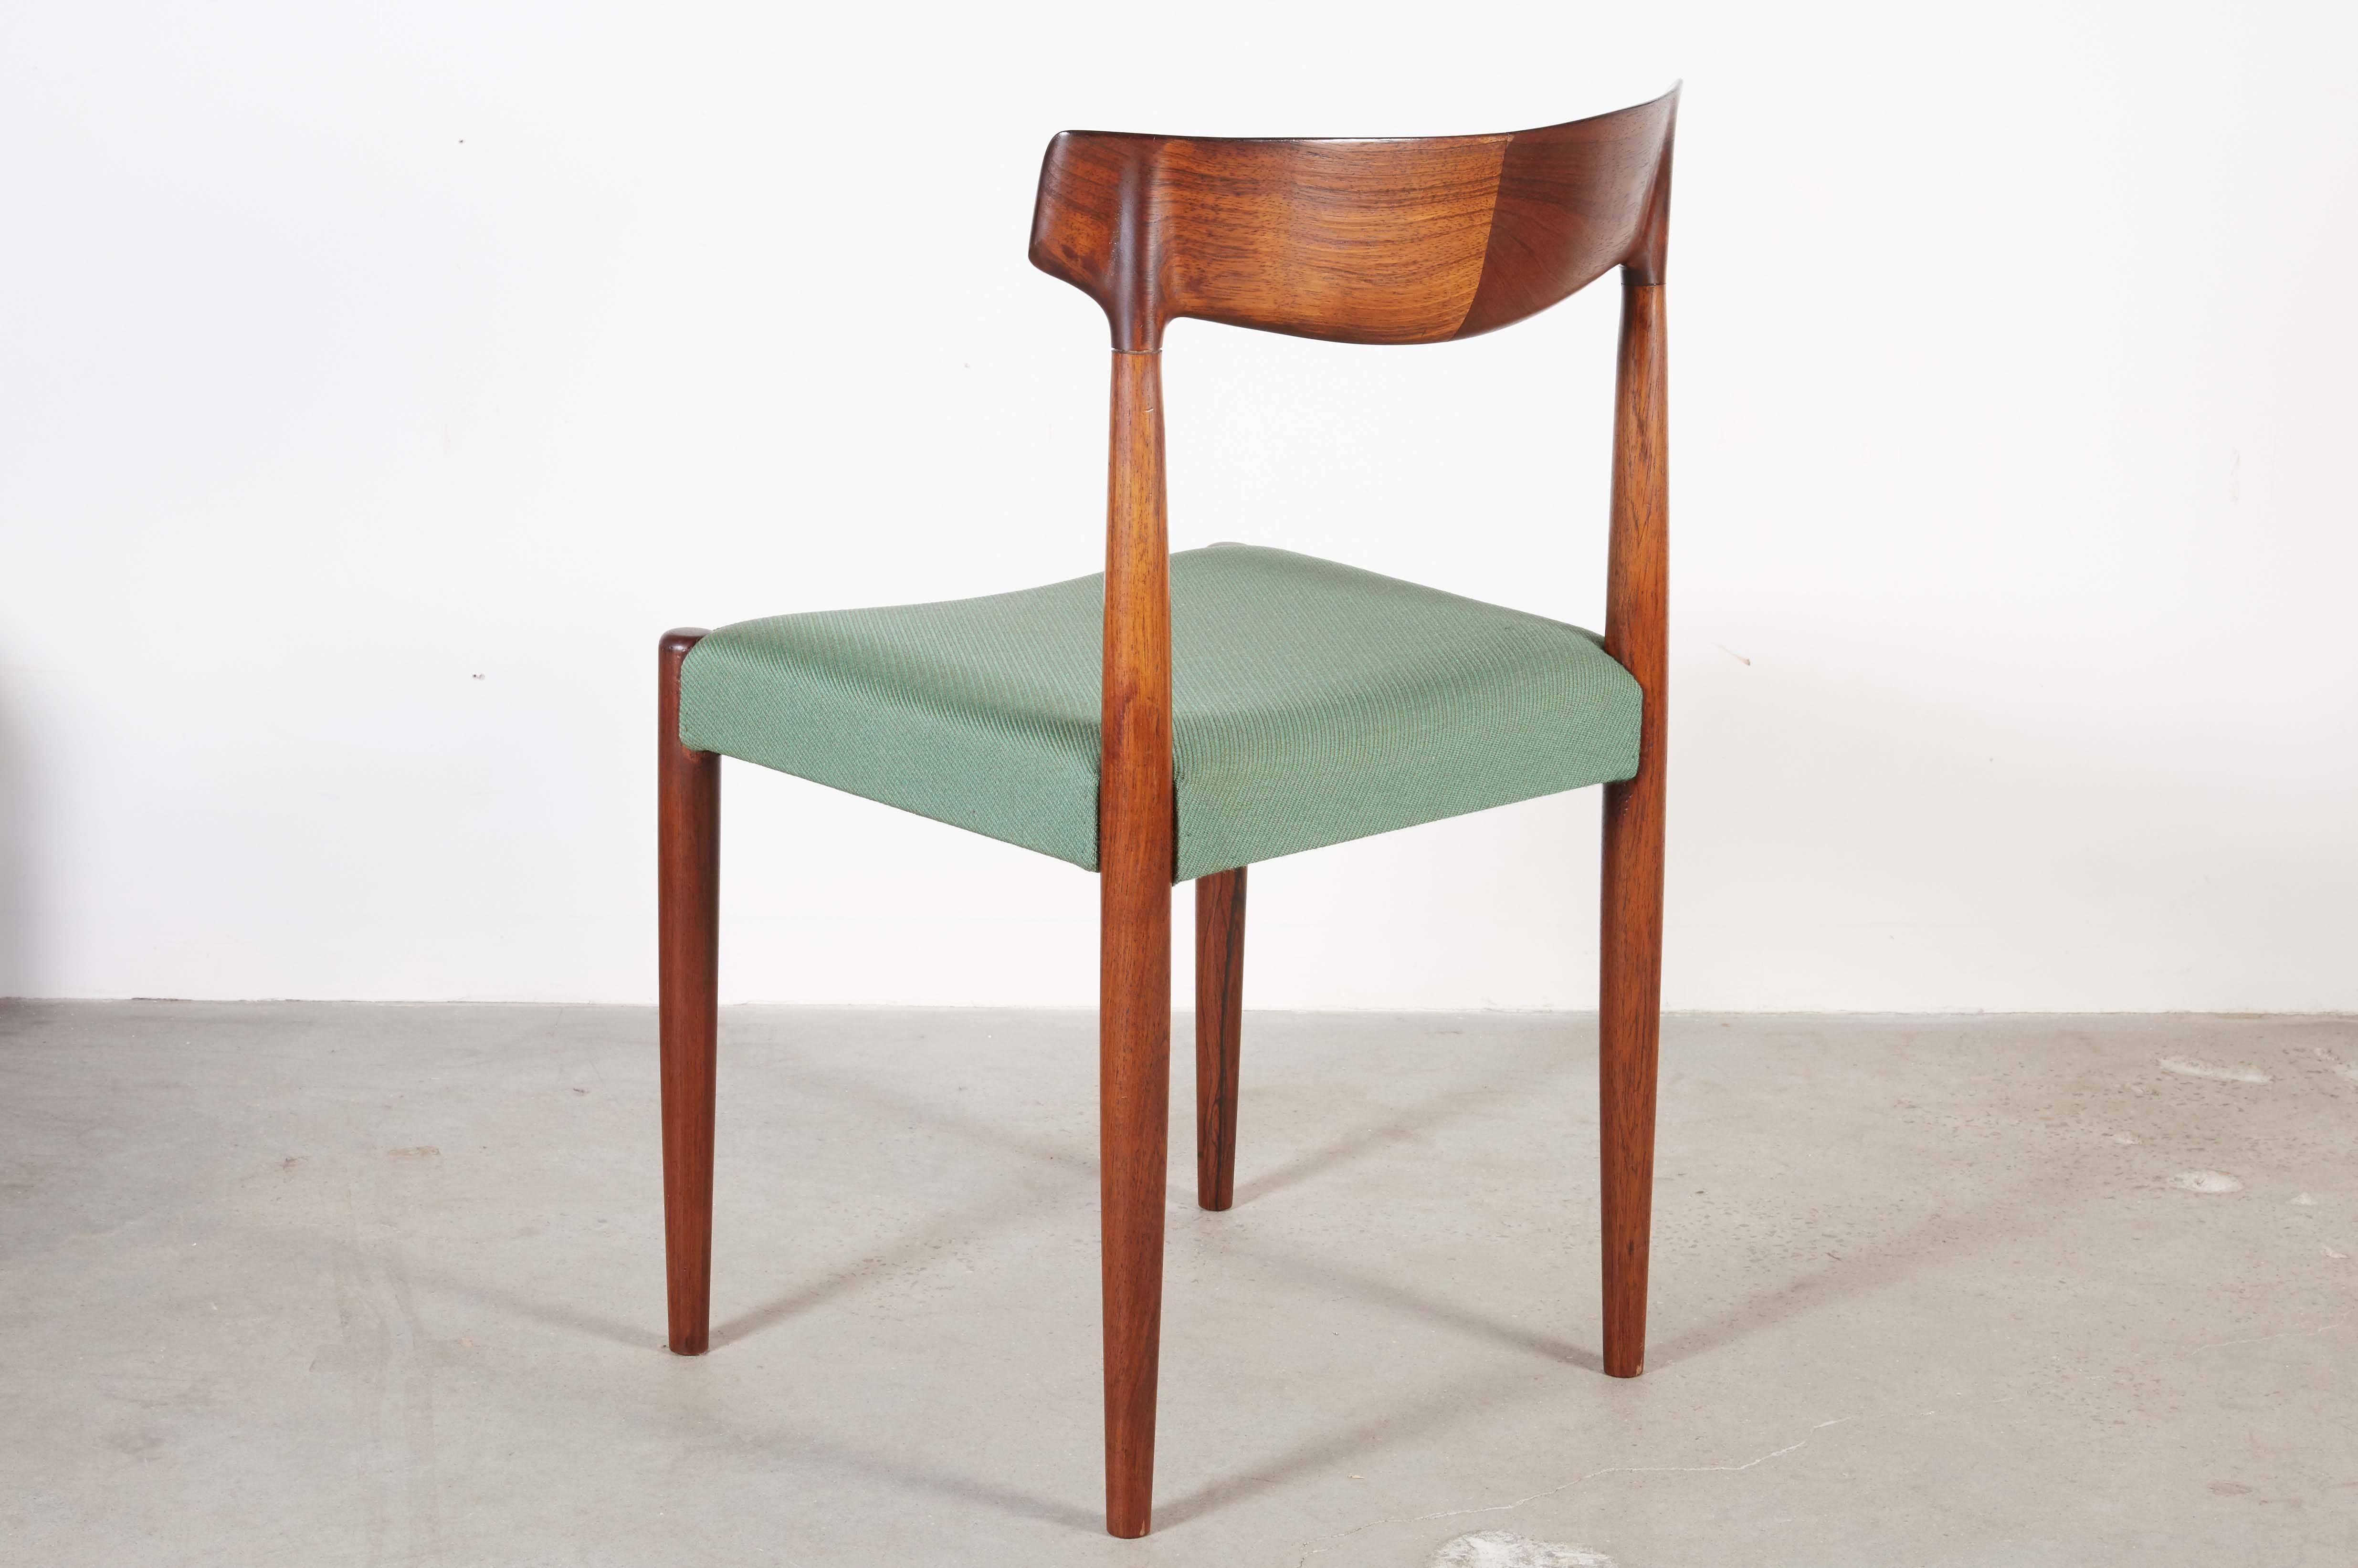 Mid-20th Century Danish Dining Chairs by Knud Faerch, set of 6